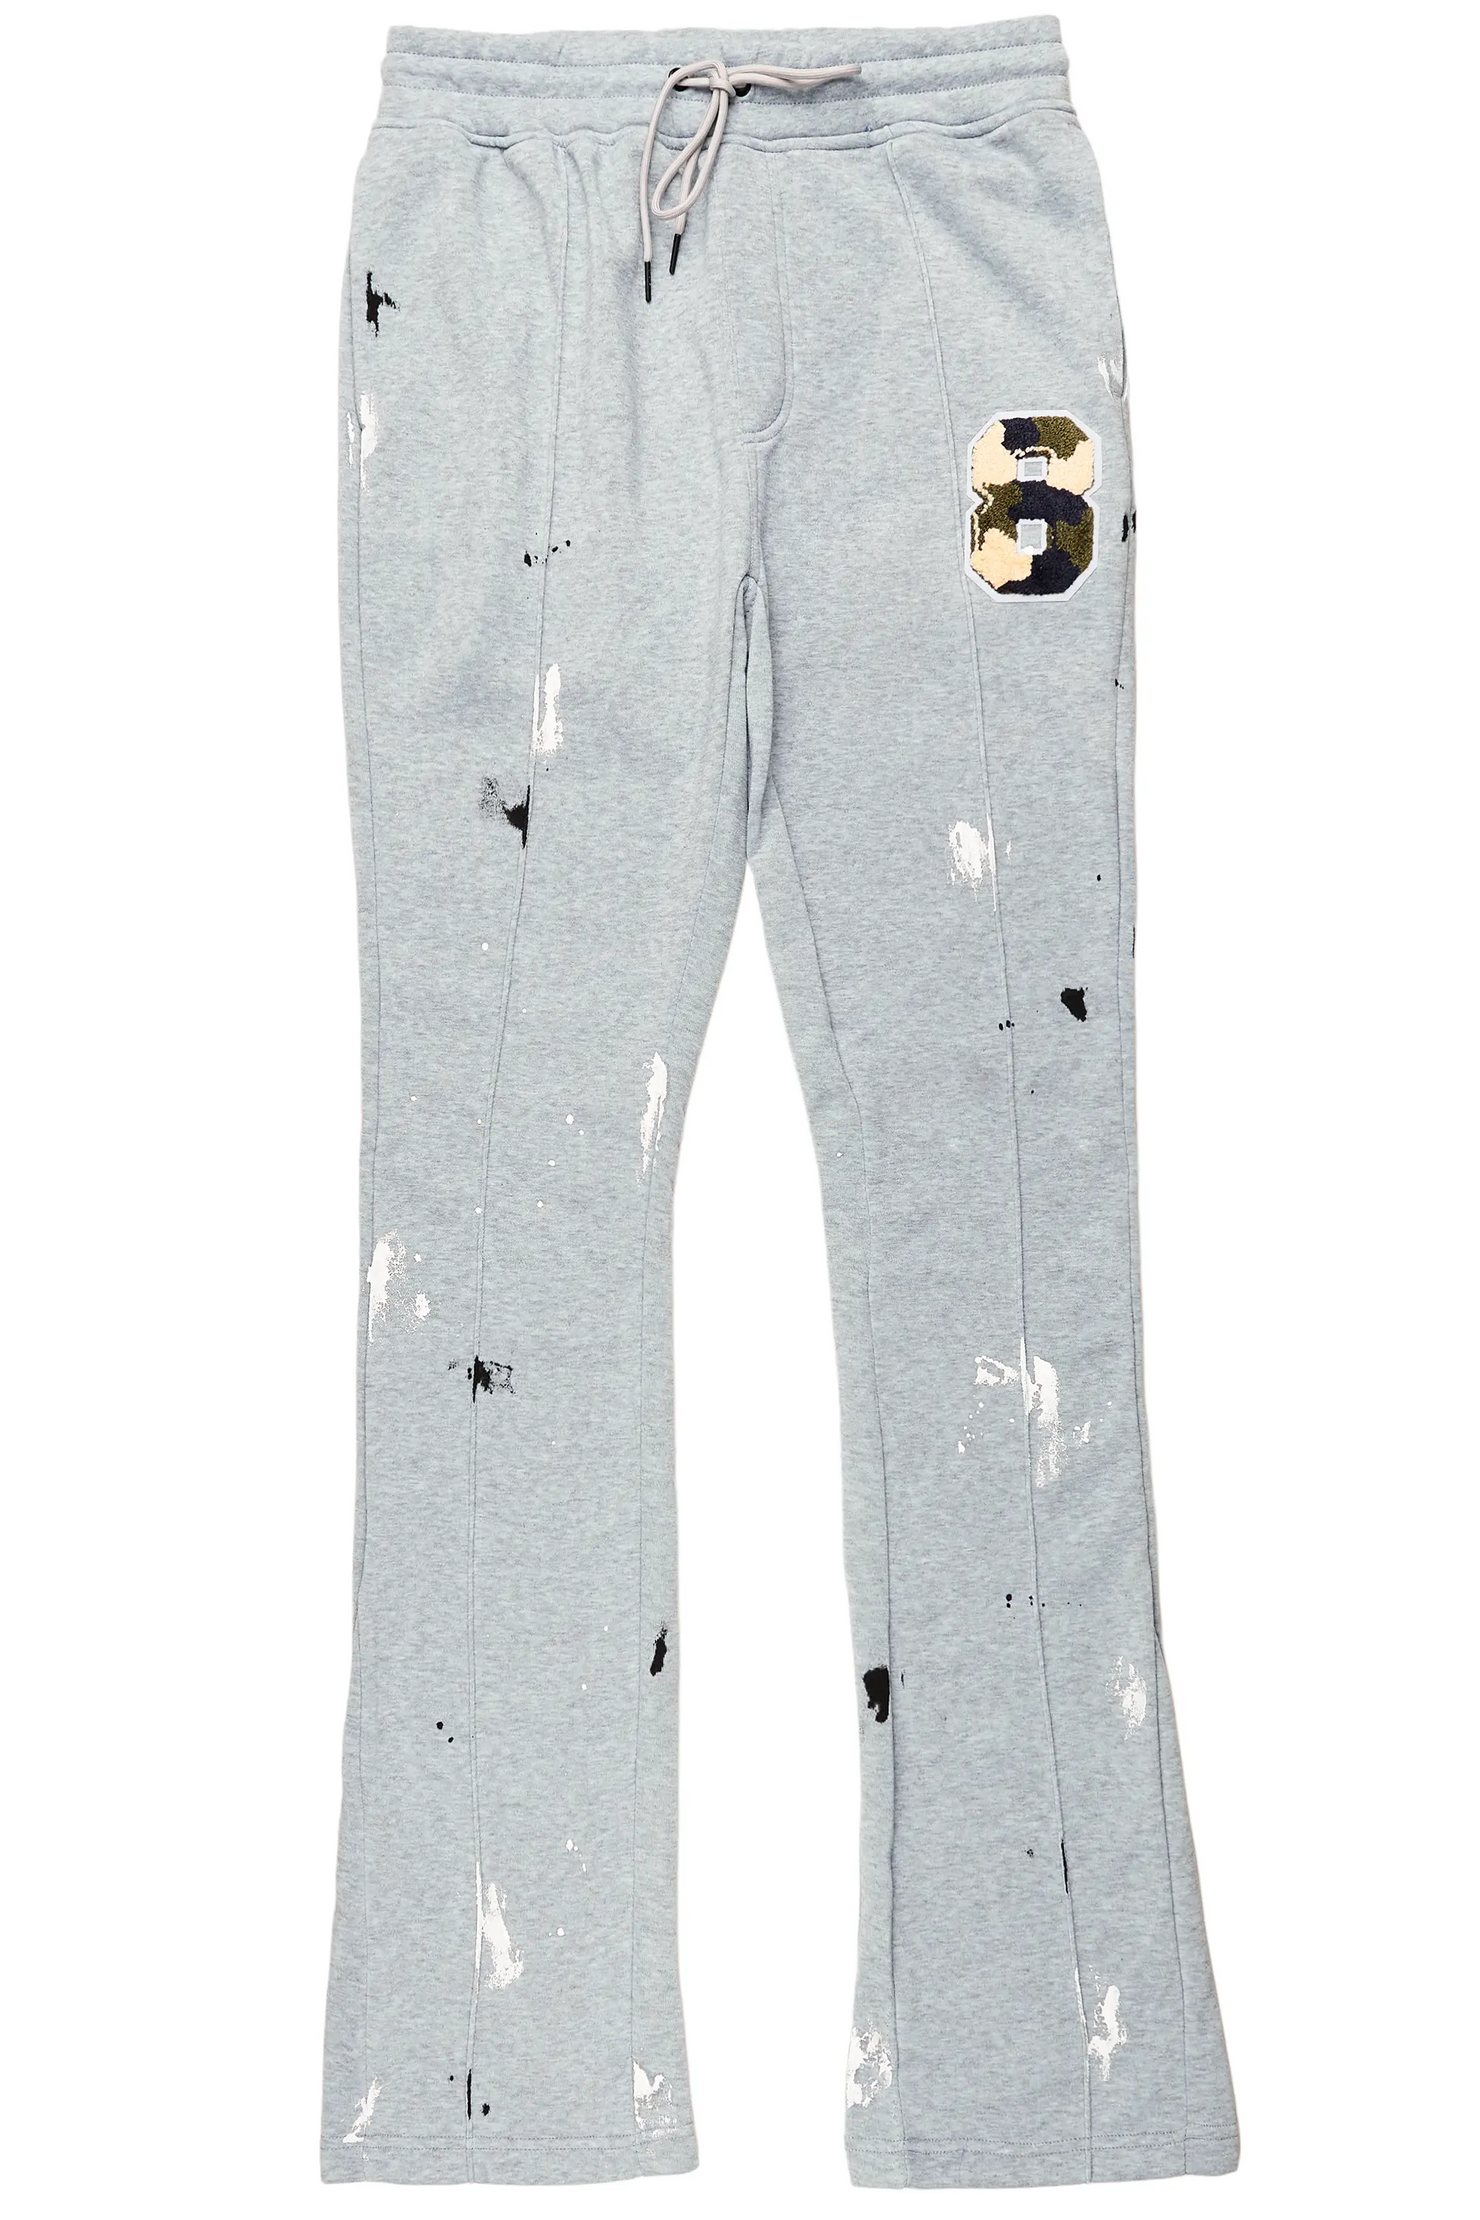 Austin Heather Grey Patchwork Stacked Flare Pants